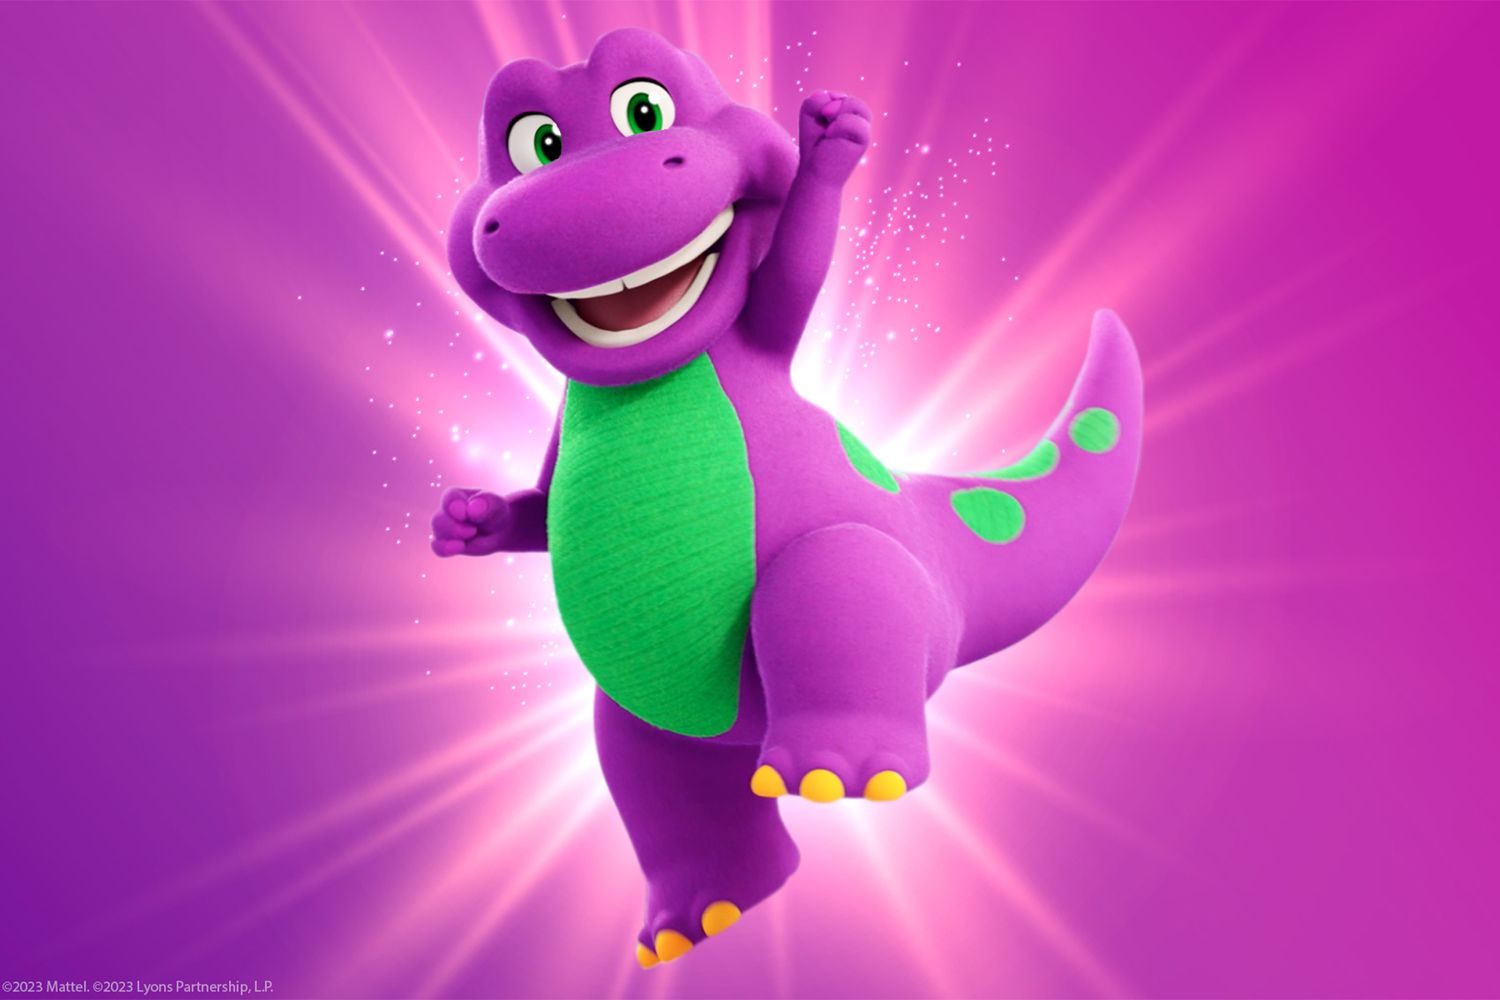 Barney relaunched with film, animated series, and more 